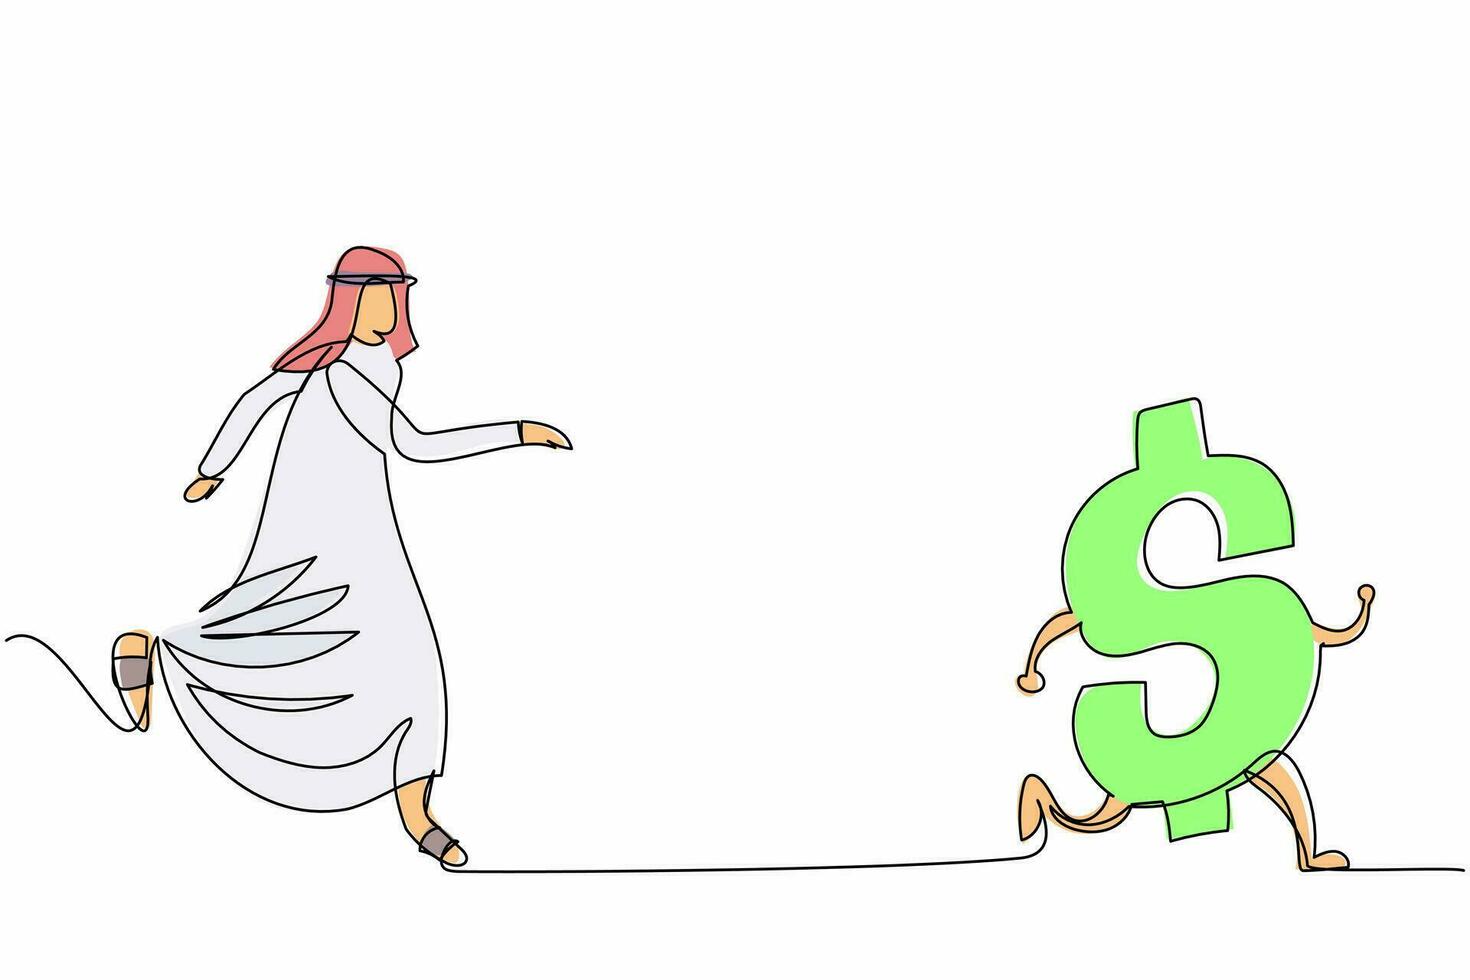 Single one line drawing Arab businessman chasing dollar symbol. Pursuit to success, wealth, financial freedom, rich, investment. Business metaphor. Continuous line design graphic vector illustration